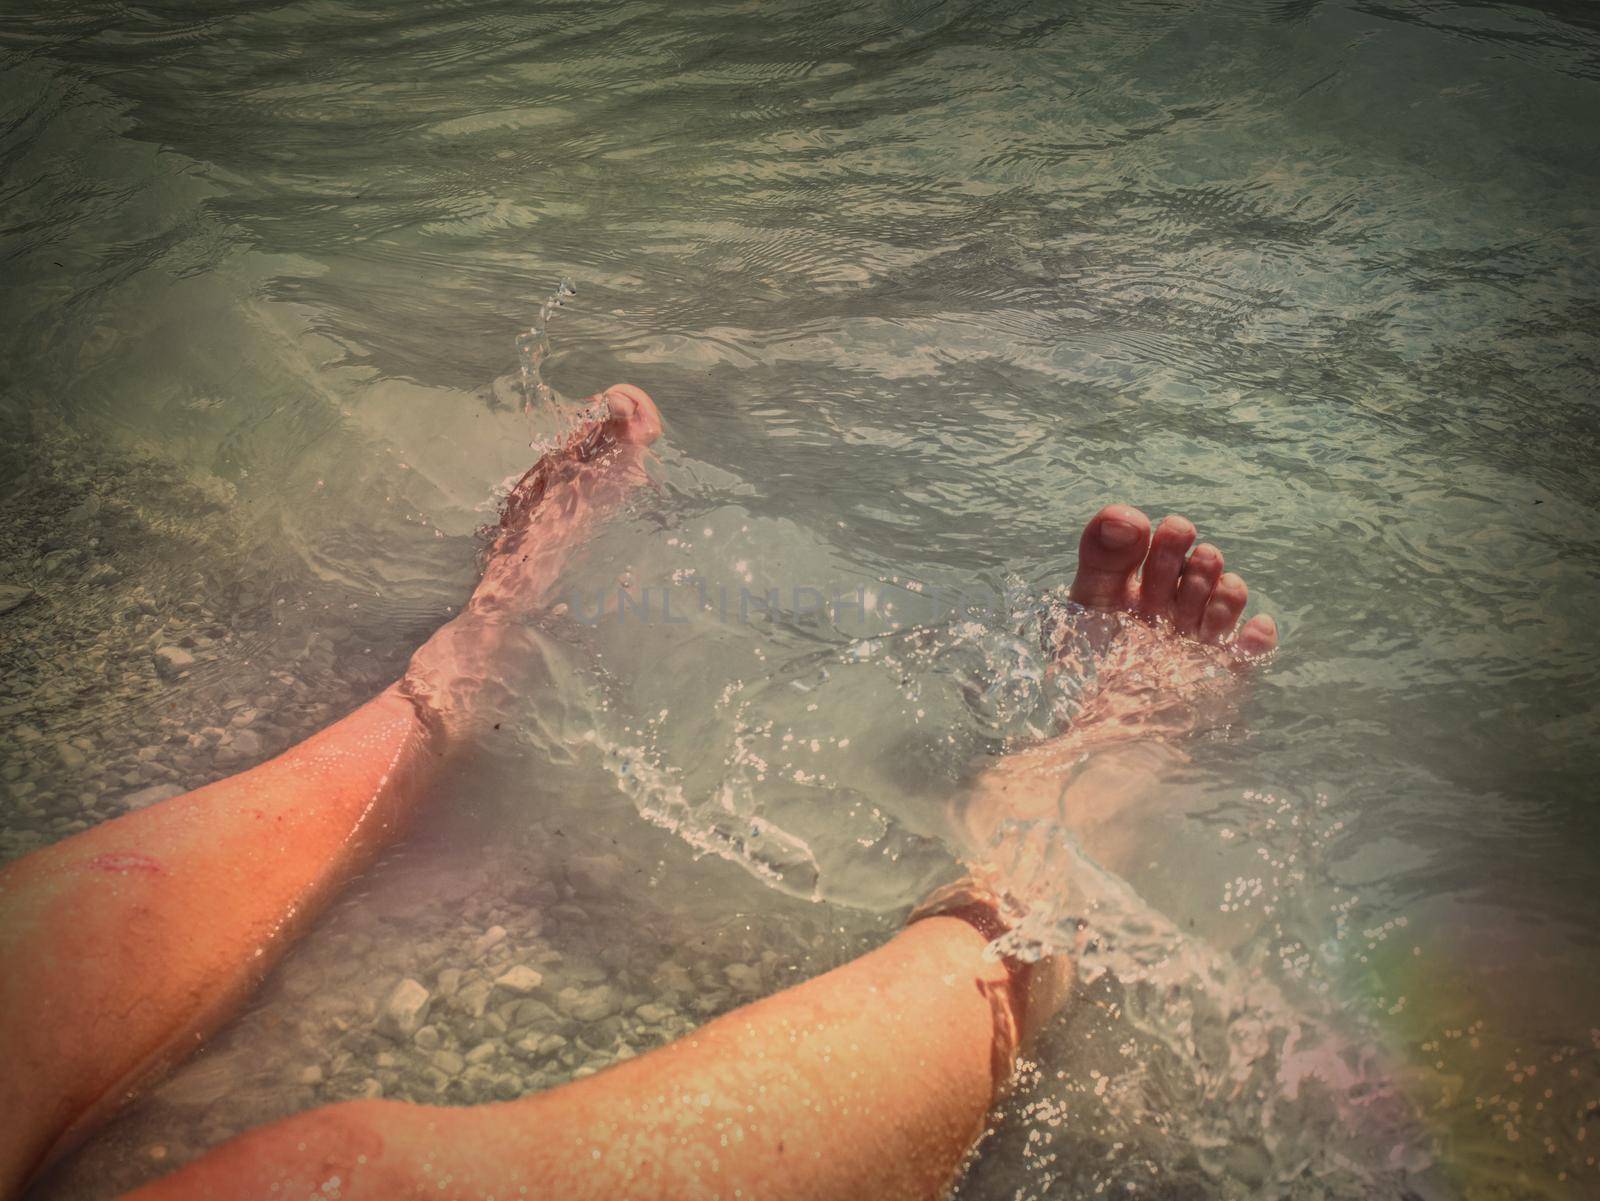 Naked legs stay on gentle gravel in water of carabbien sea.  Abstract.